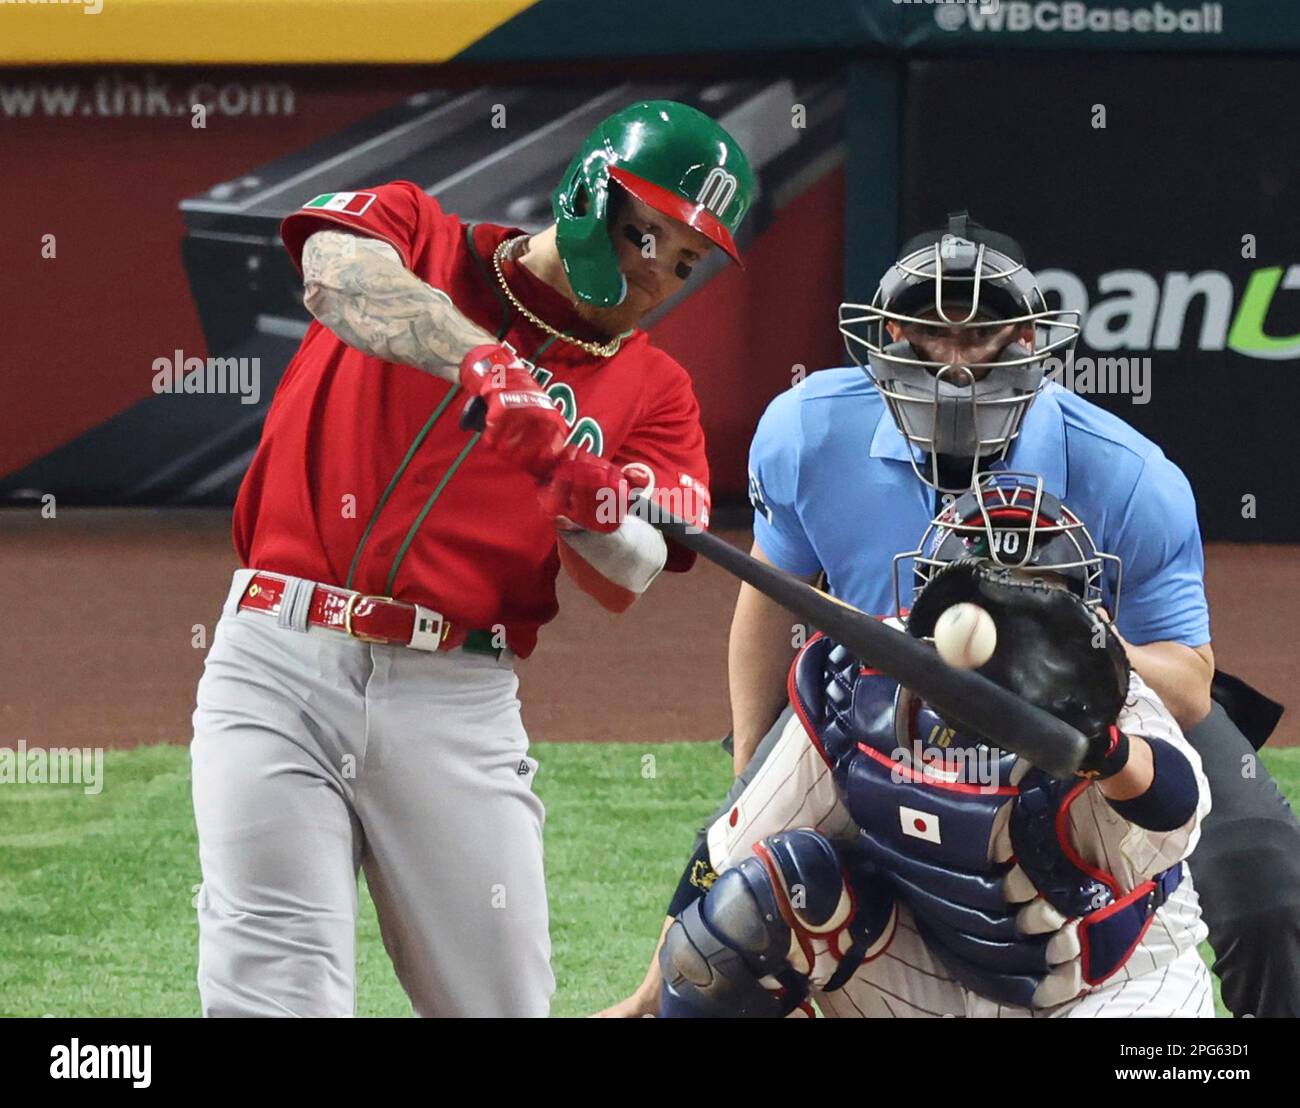 Alex Verdugo of Mexico hits one-run double in the 8th inning during the  World Baseball Classic (WBC) semifinal match between Mexico and Japan at  LoanDepot Park in Miami, Florida, United States on